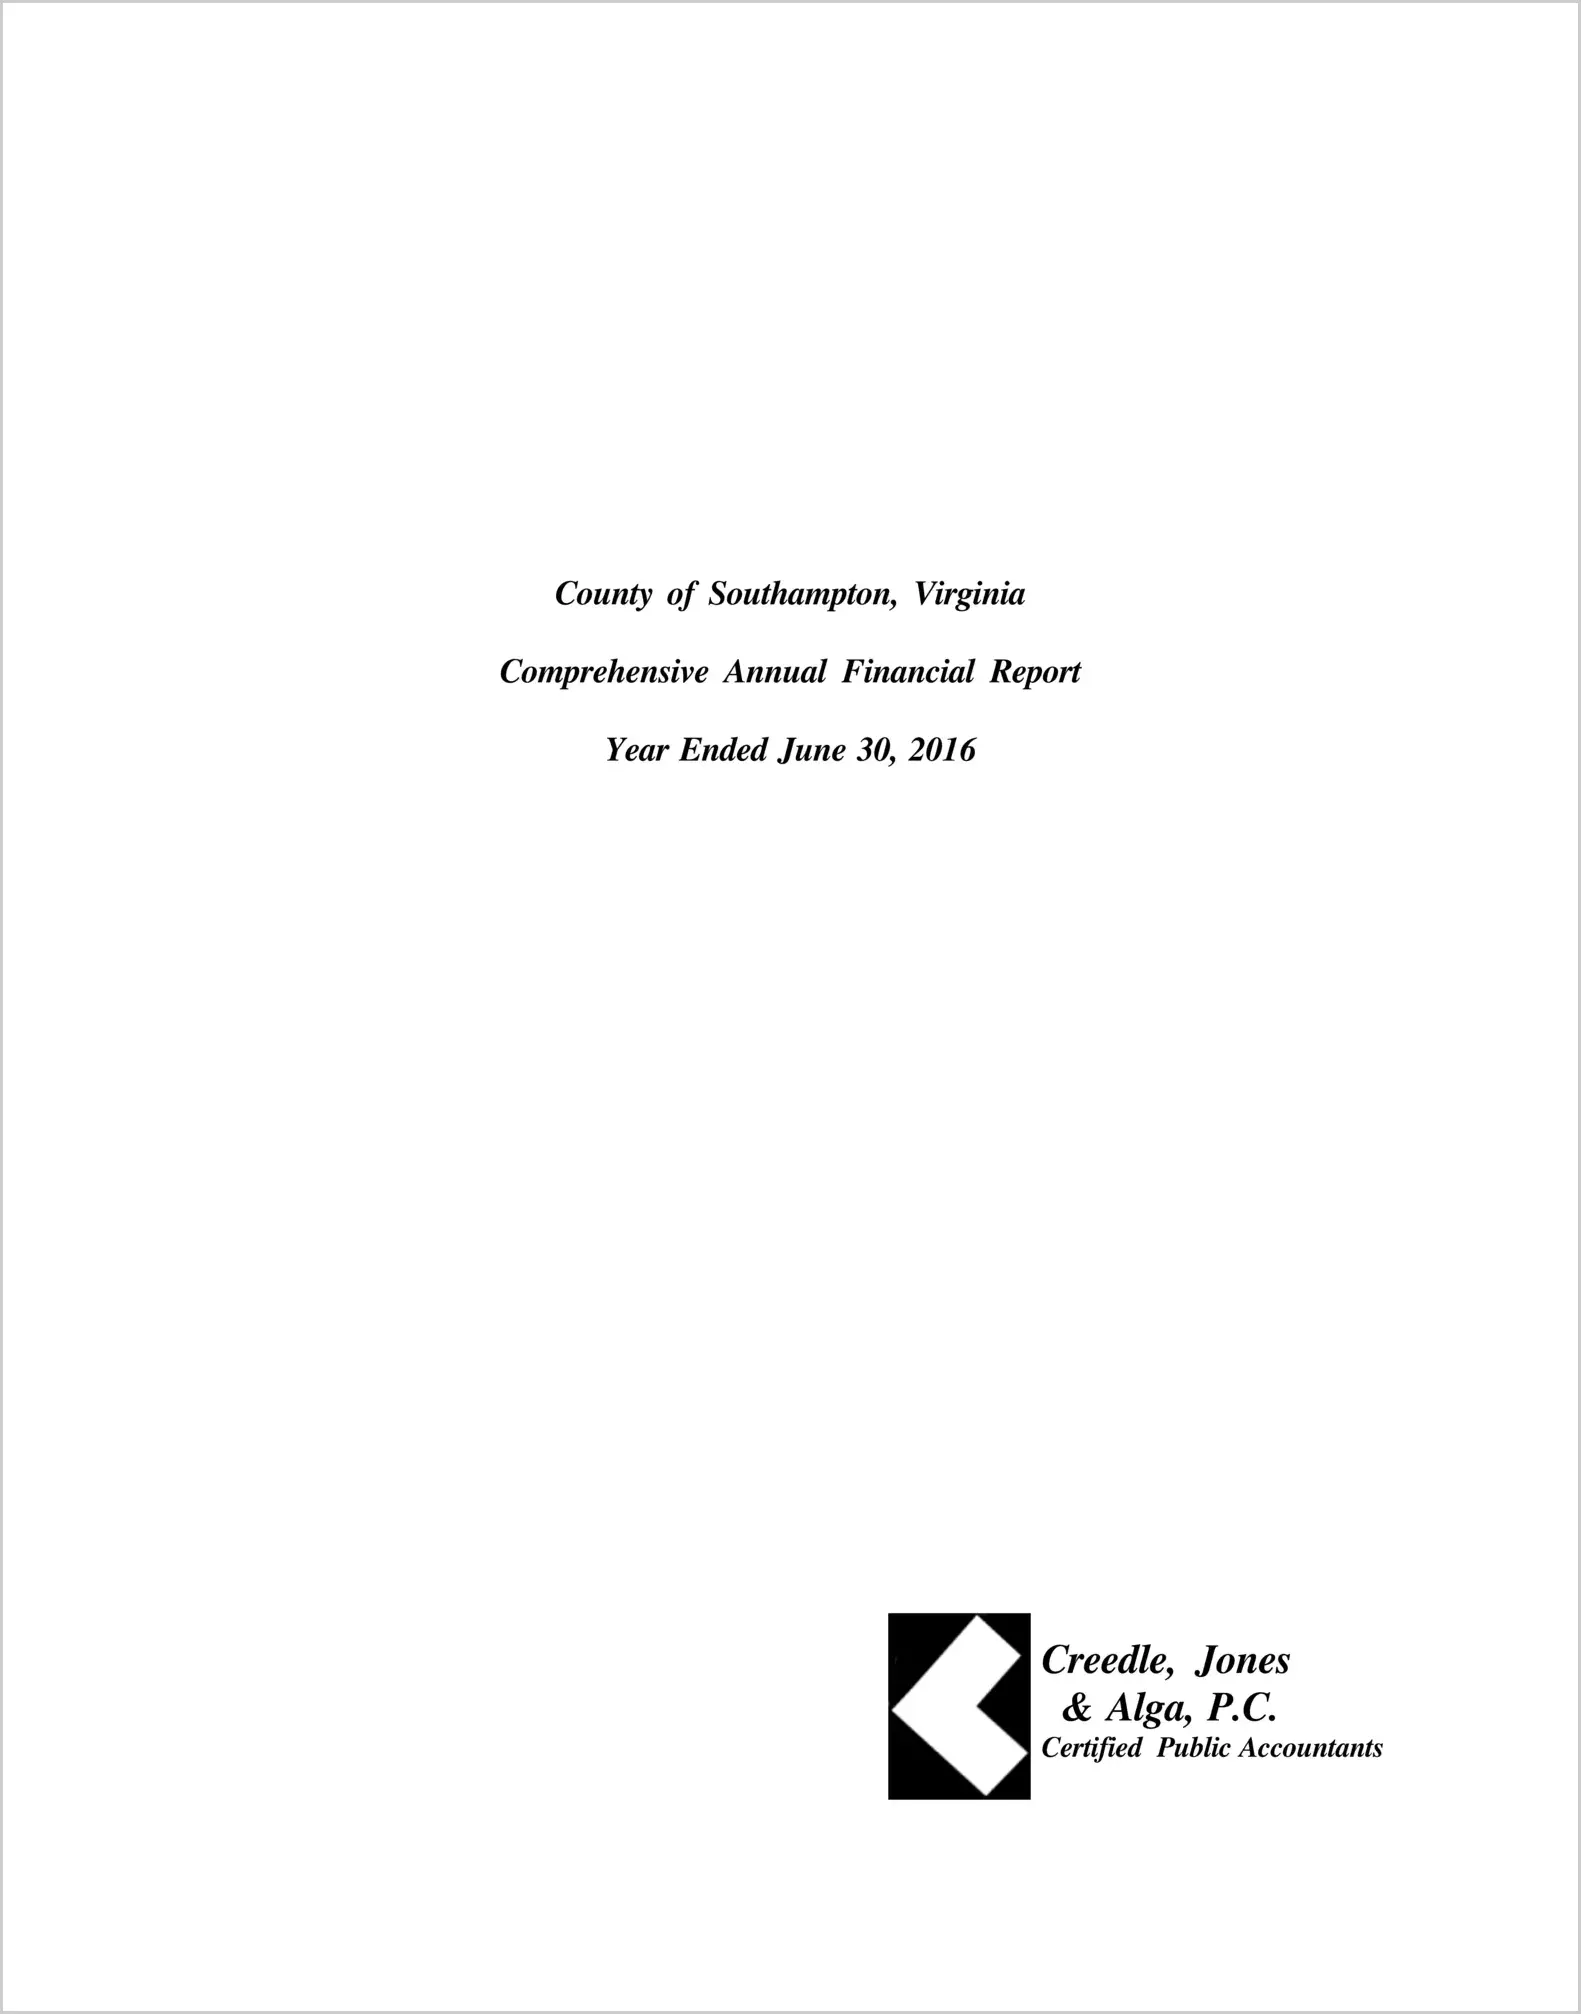 2016 Annual Financial Report for County of Southampton